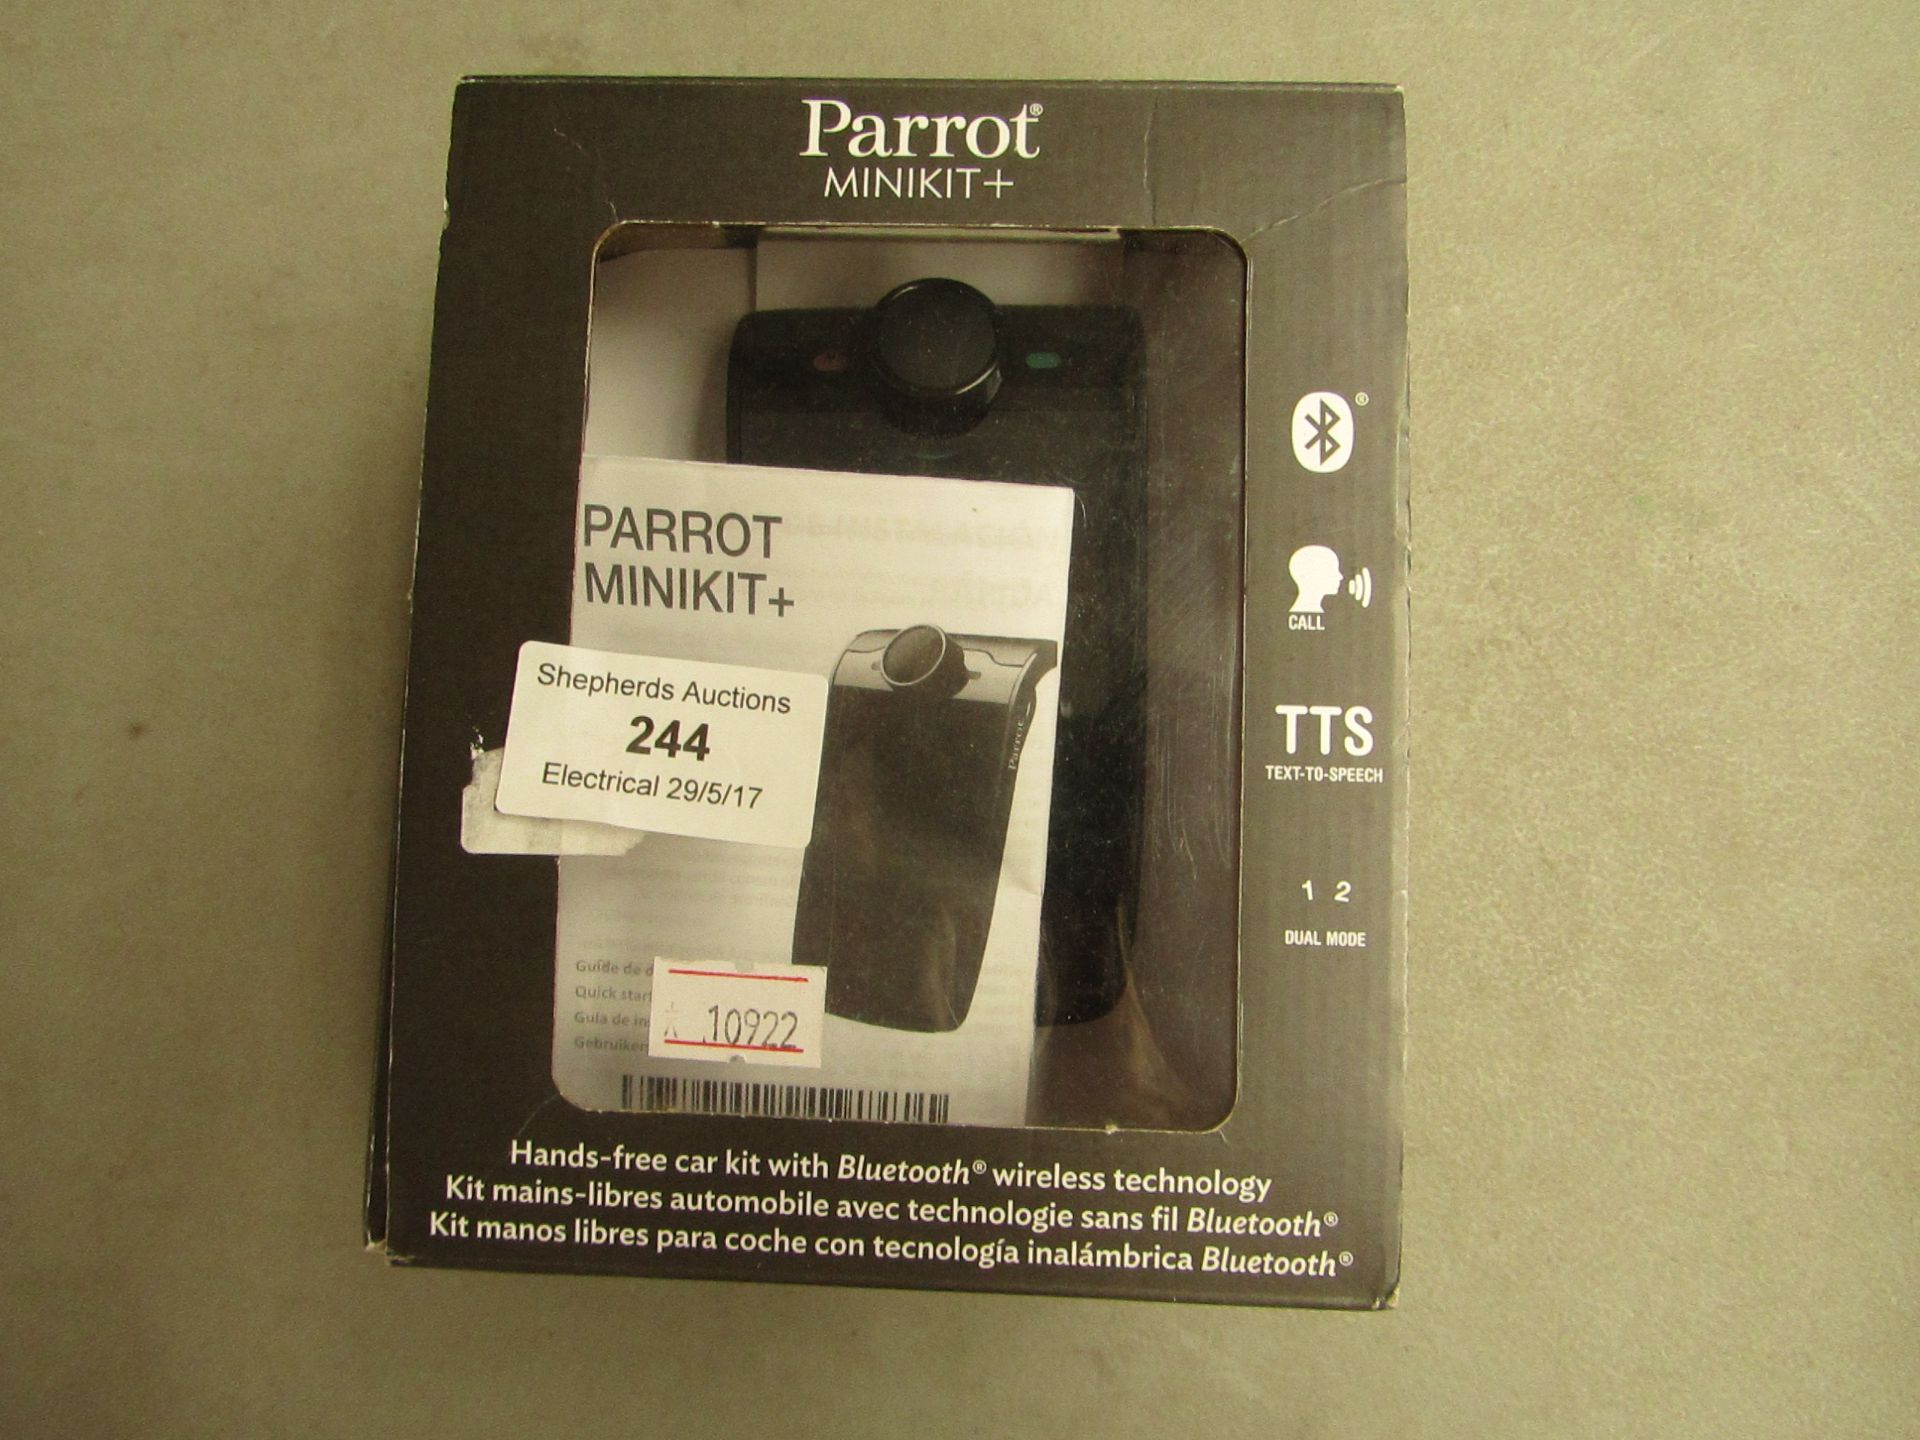 Parrot Mini Kit Plus hands free car kit with bluetooth, text to speak, voice command answer and